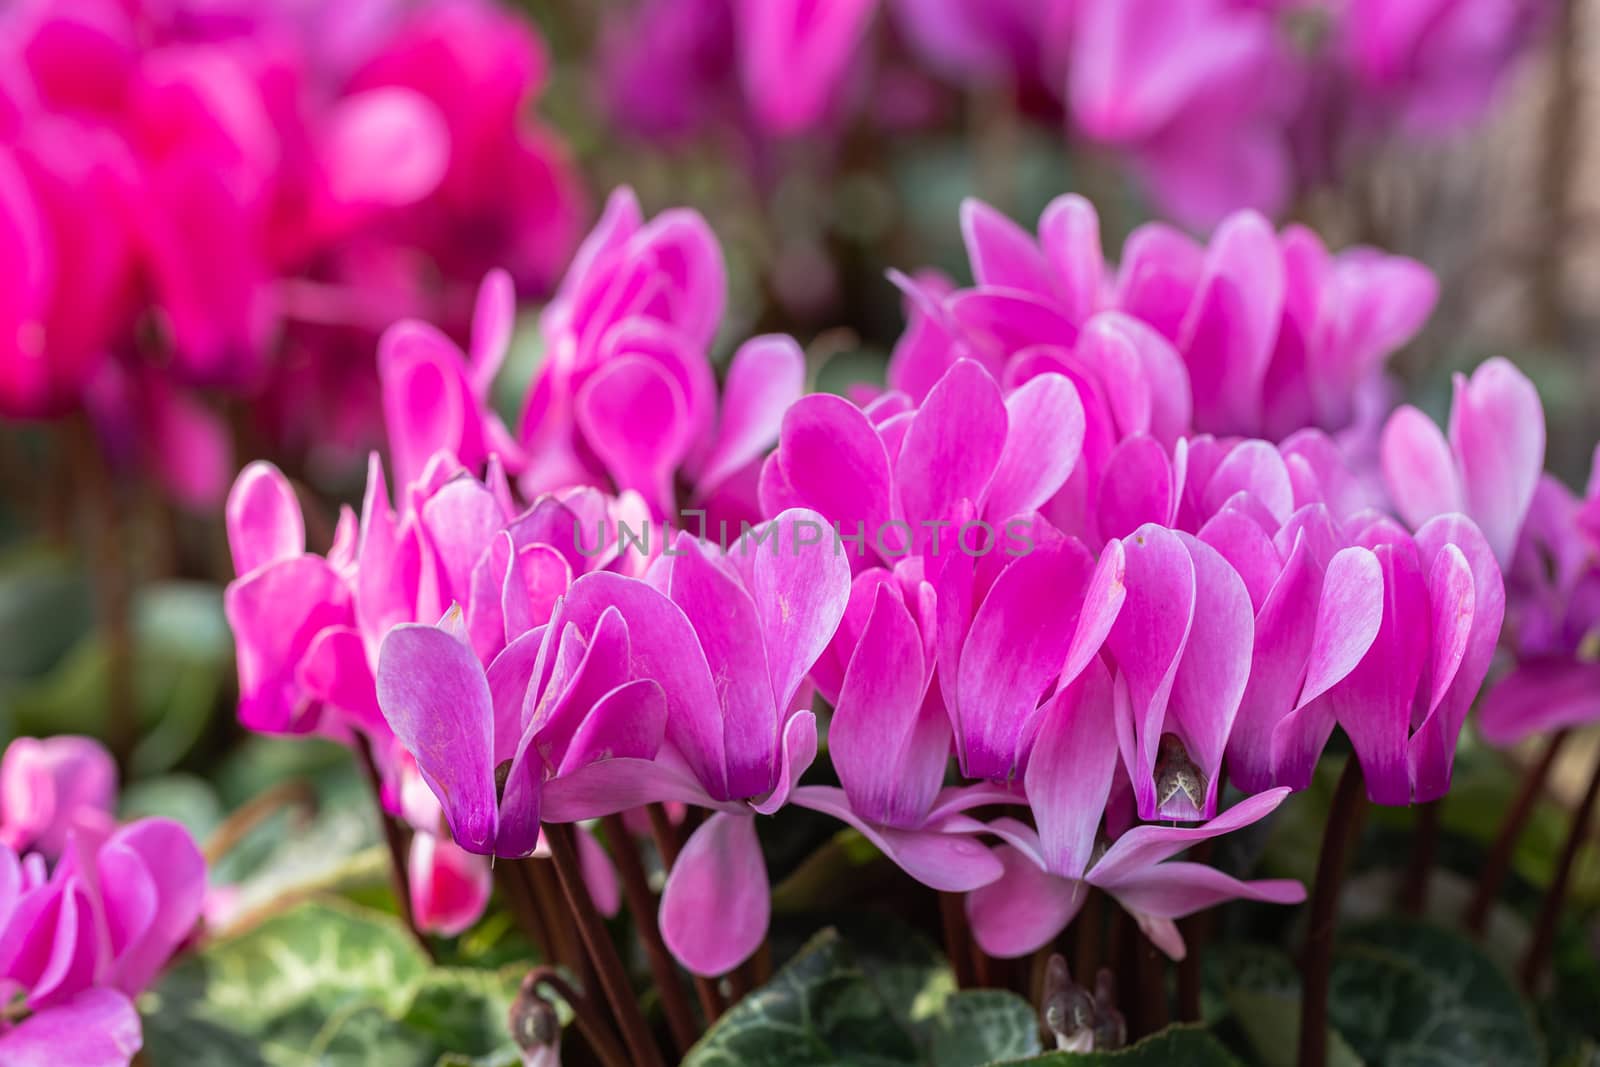 Cyclamen flower in garden at sunny summer or spring day by phanthit